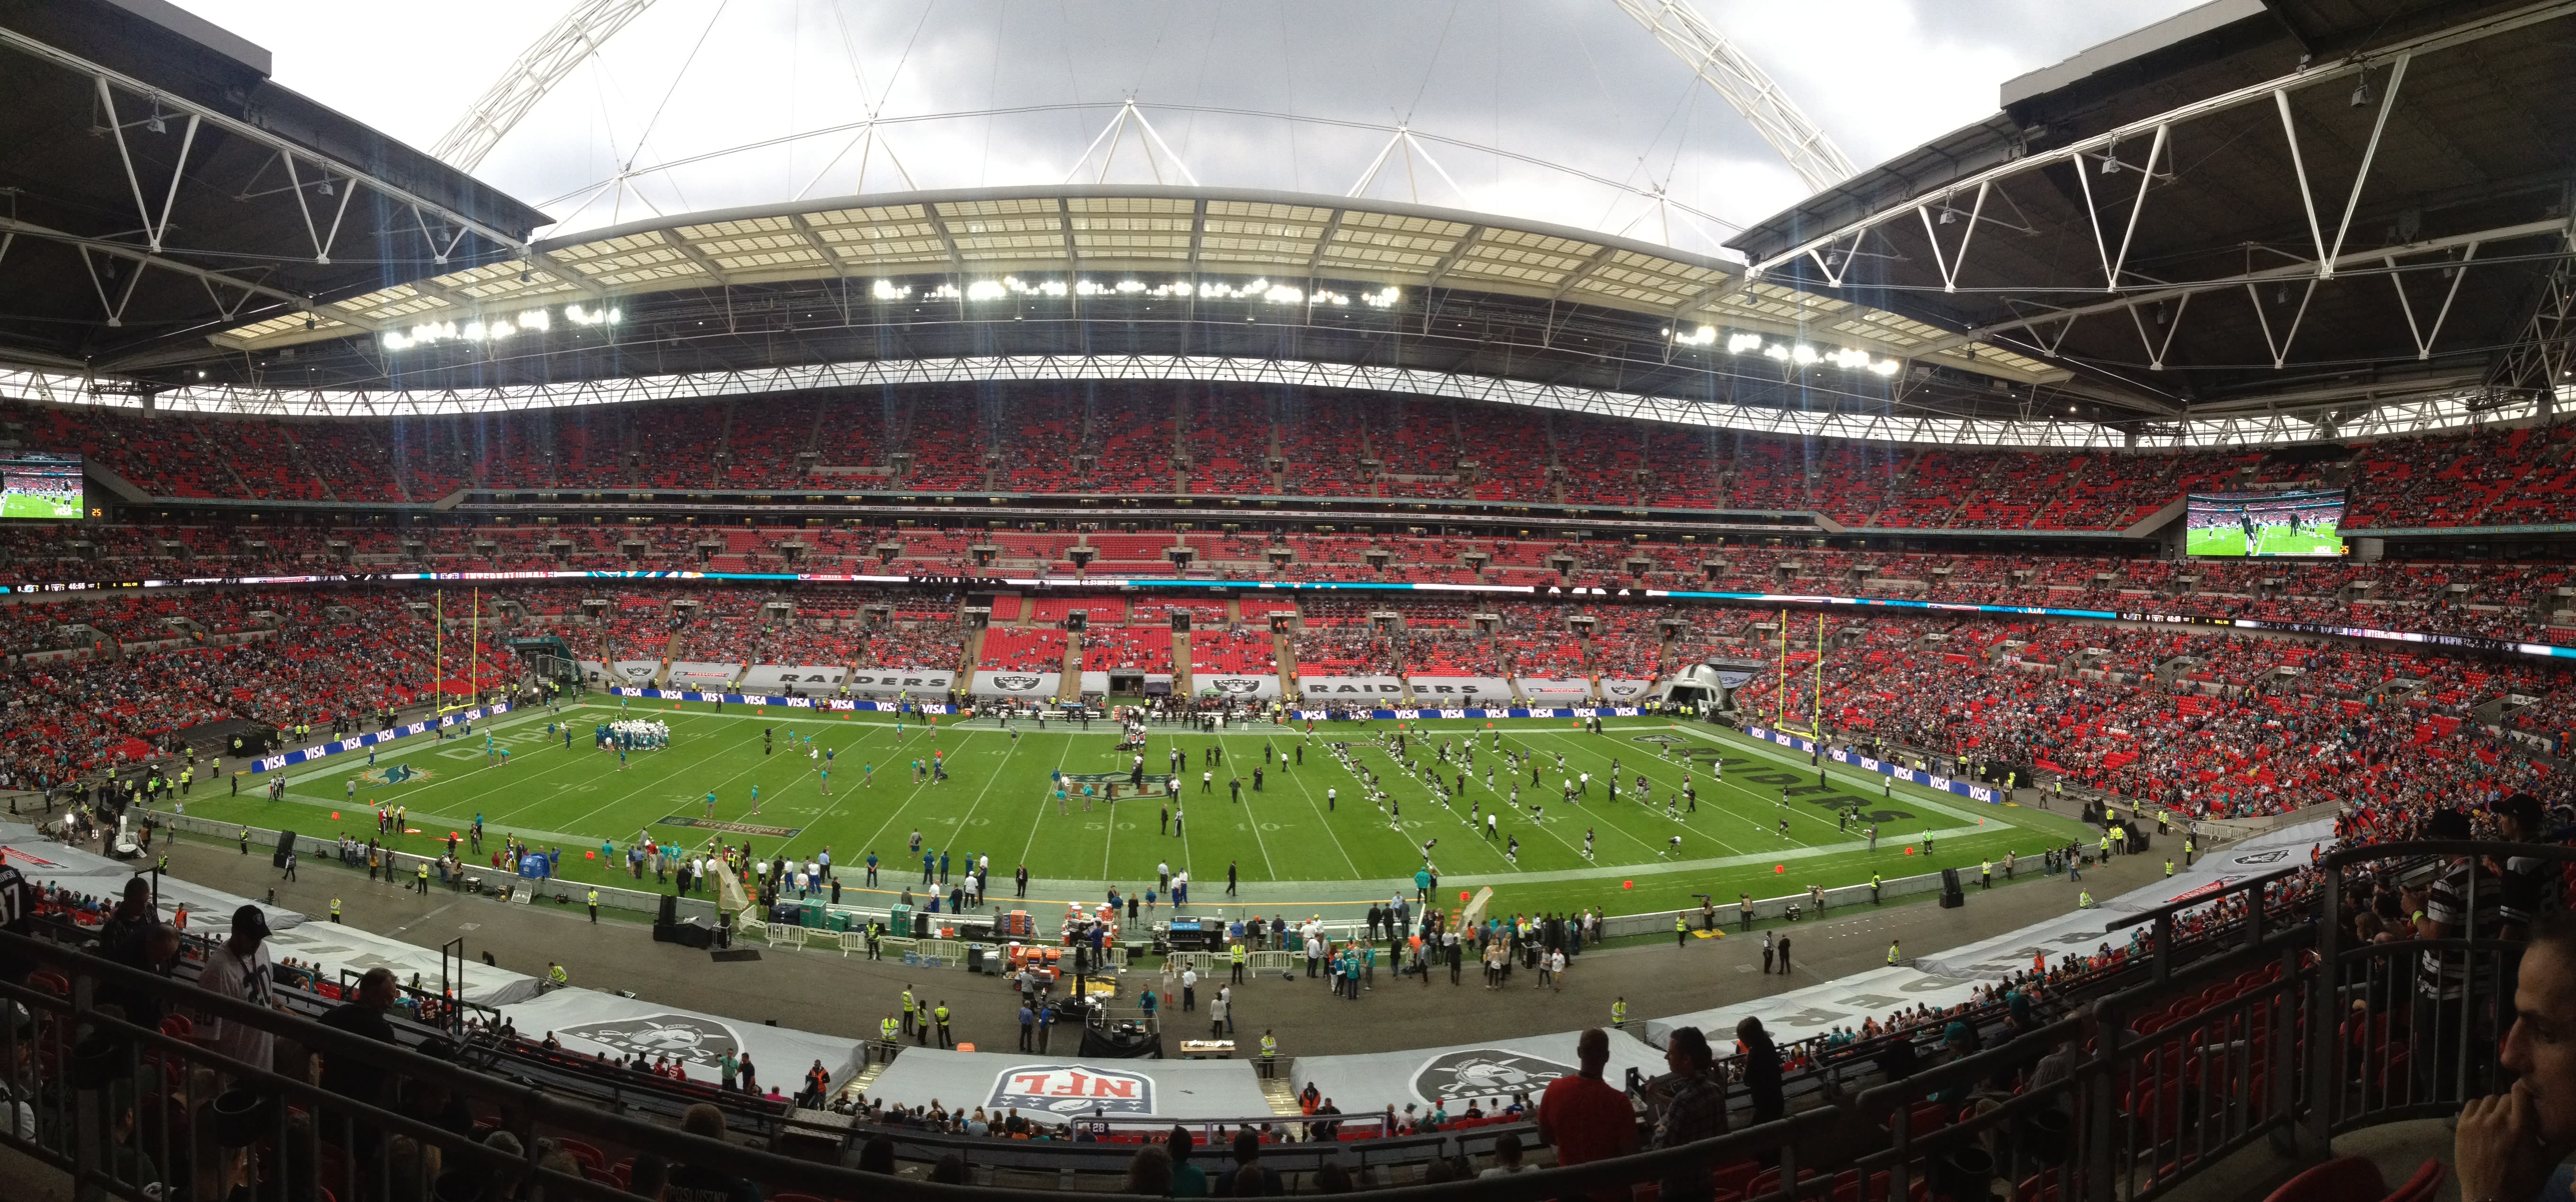 NFL London seat view from the halfway line